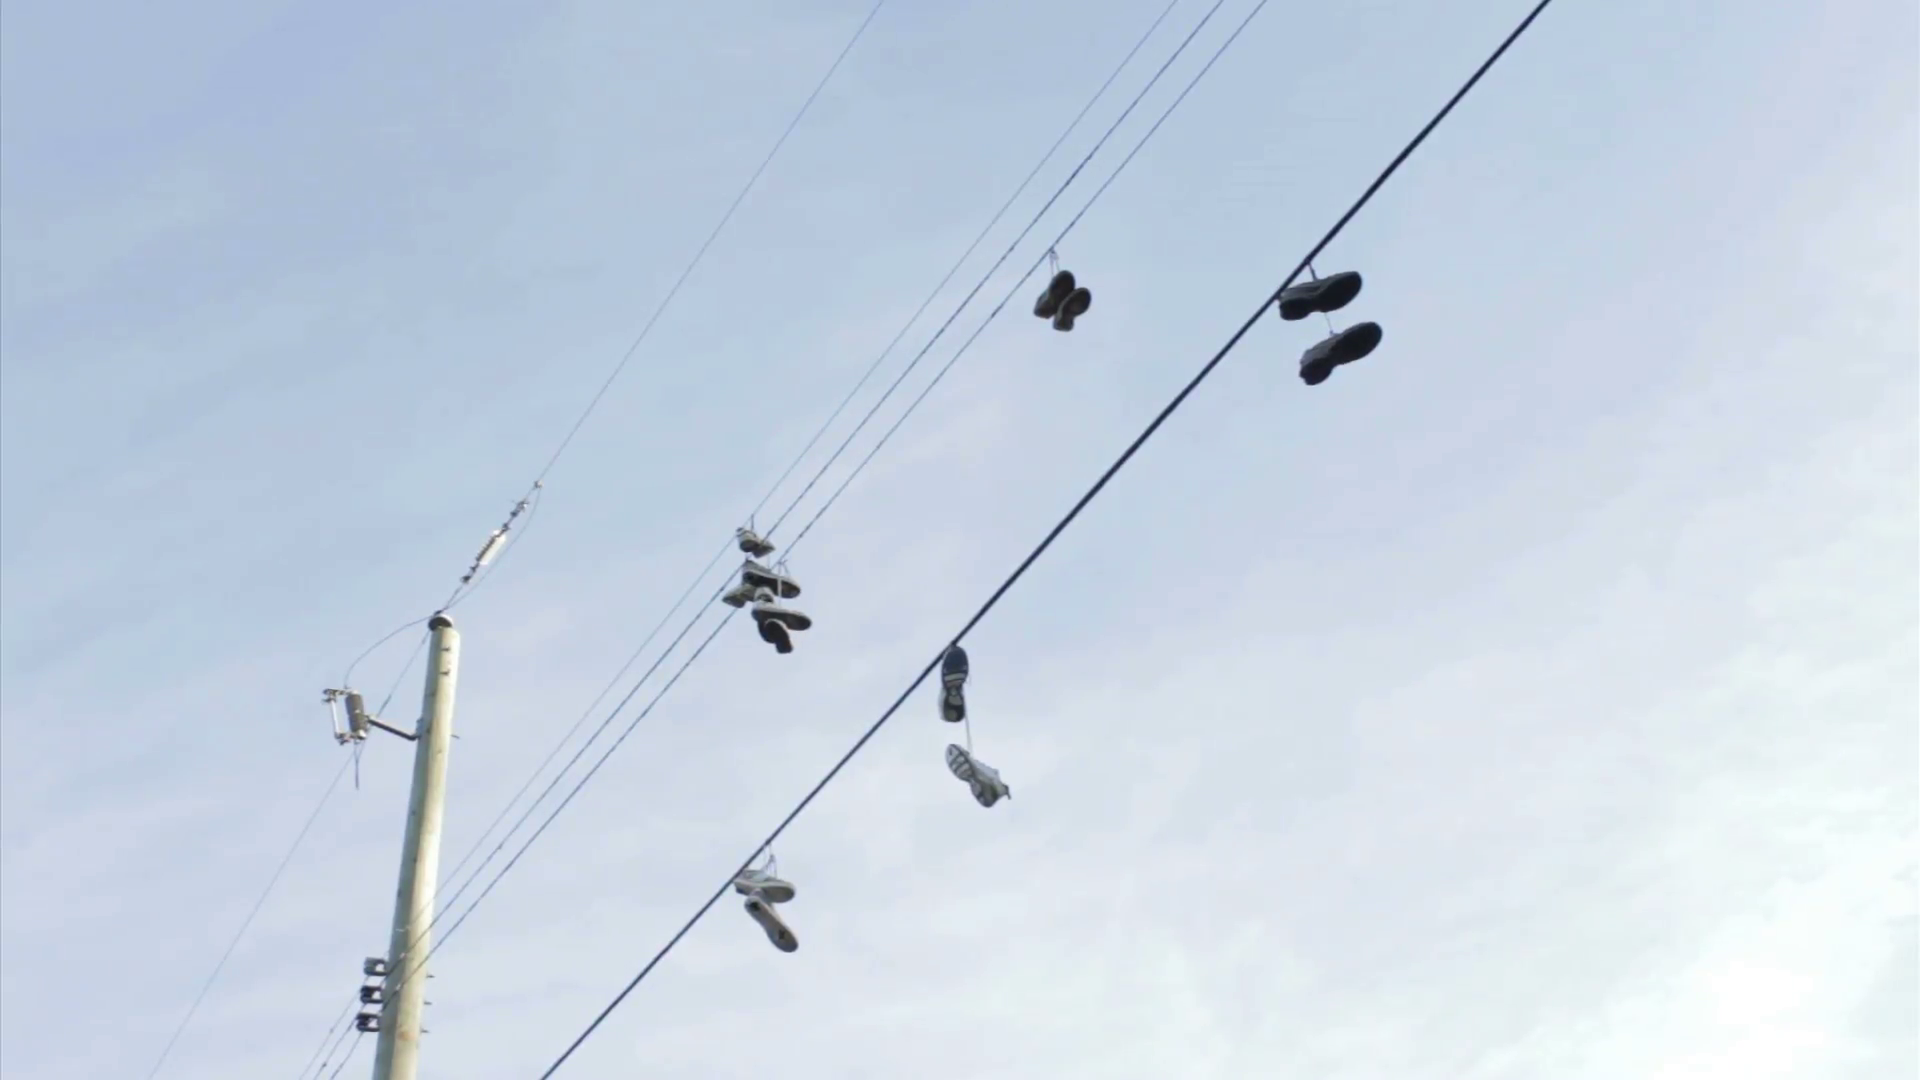 A whole bunch of running shoes hanging on some telephone wires in ...